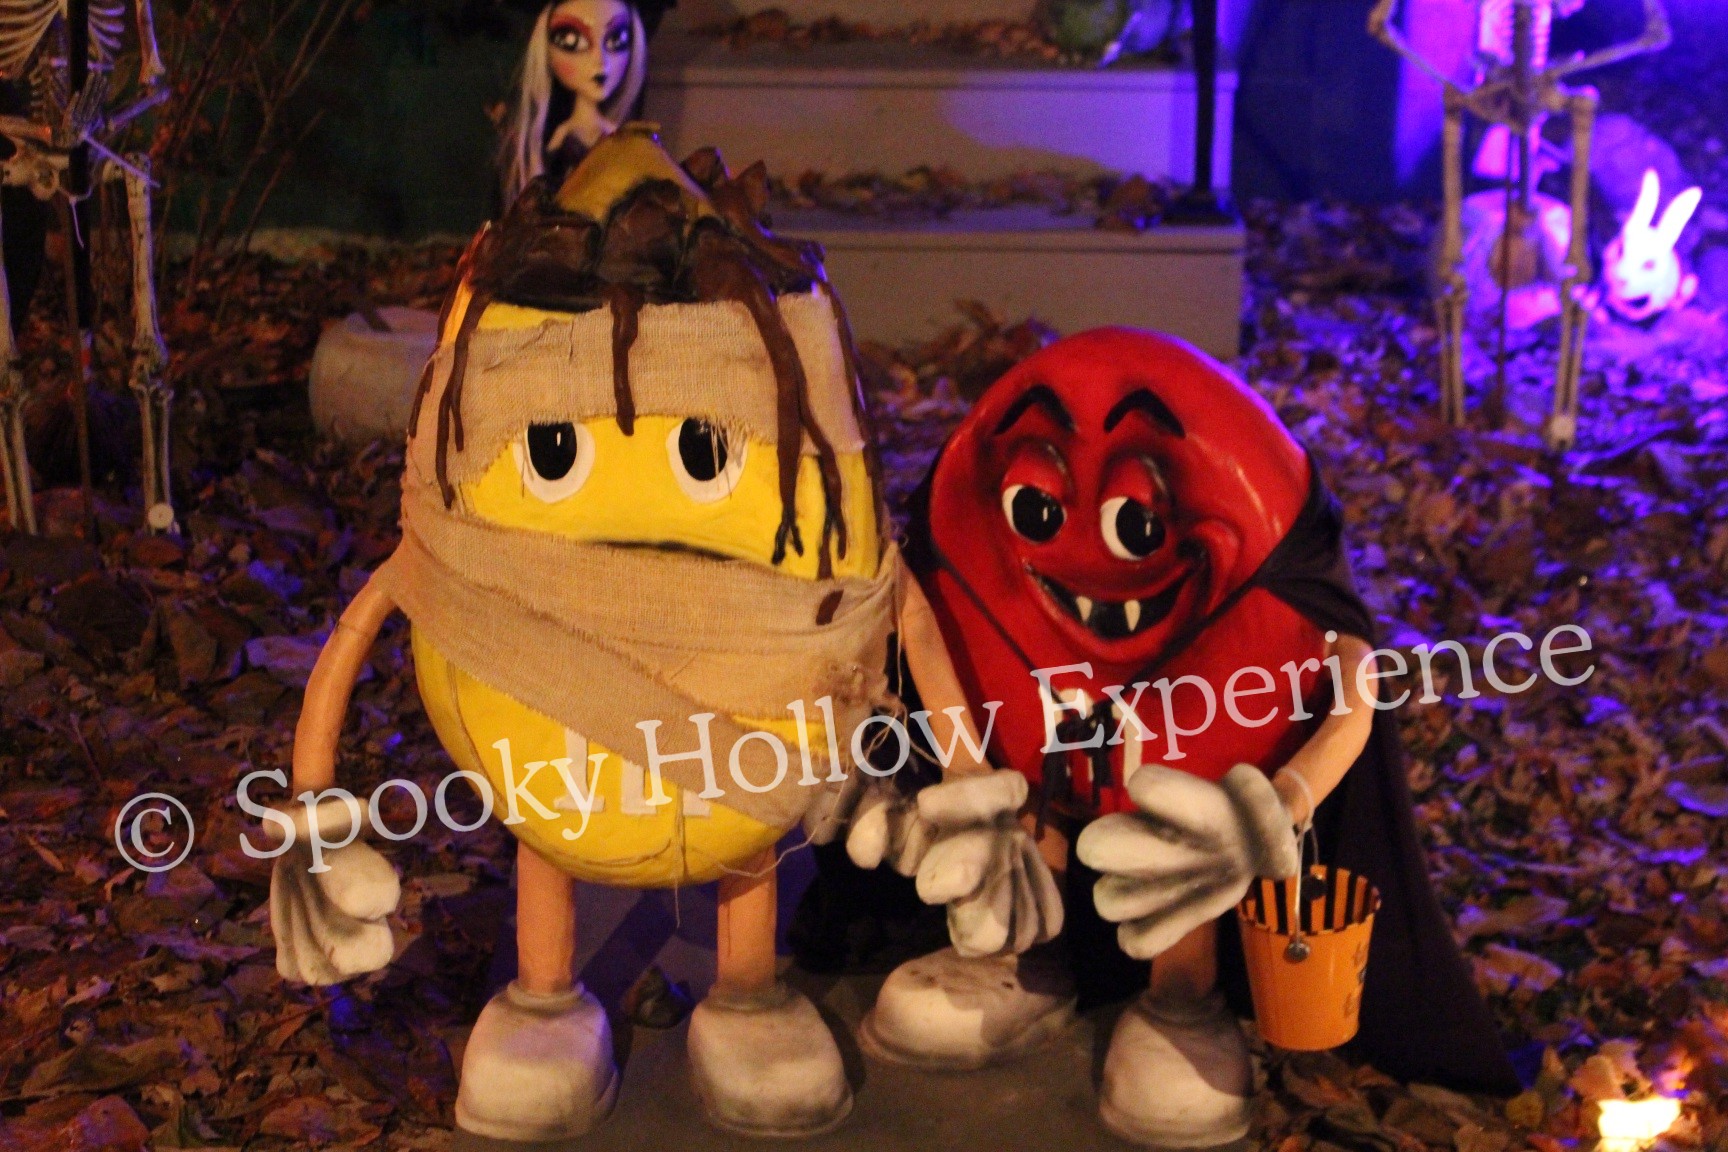 Spooky Hollow Experience Copyright M&M guys